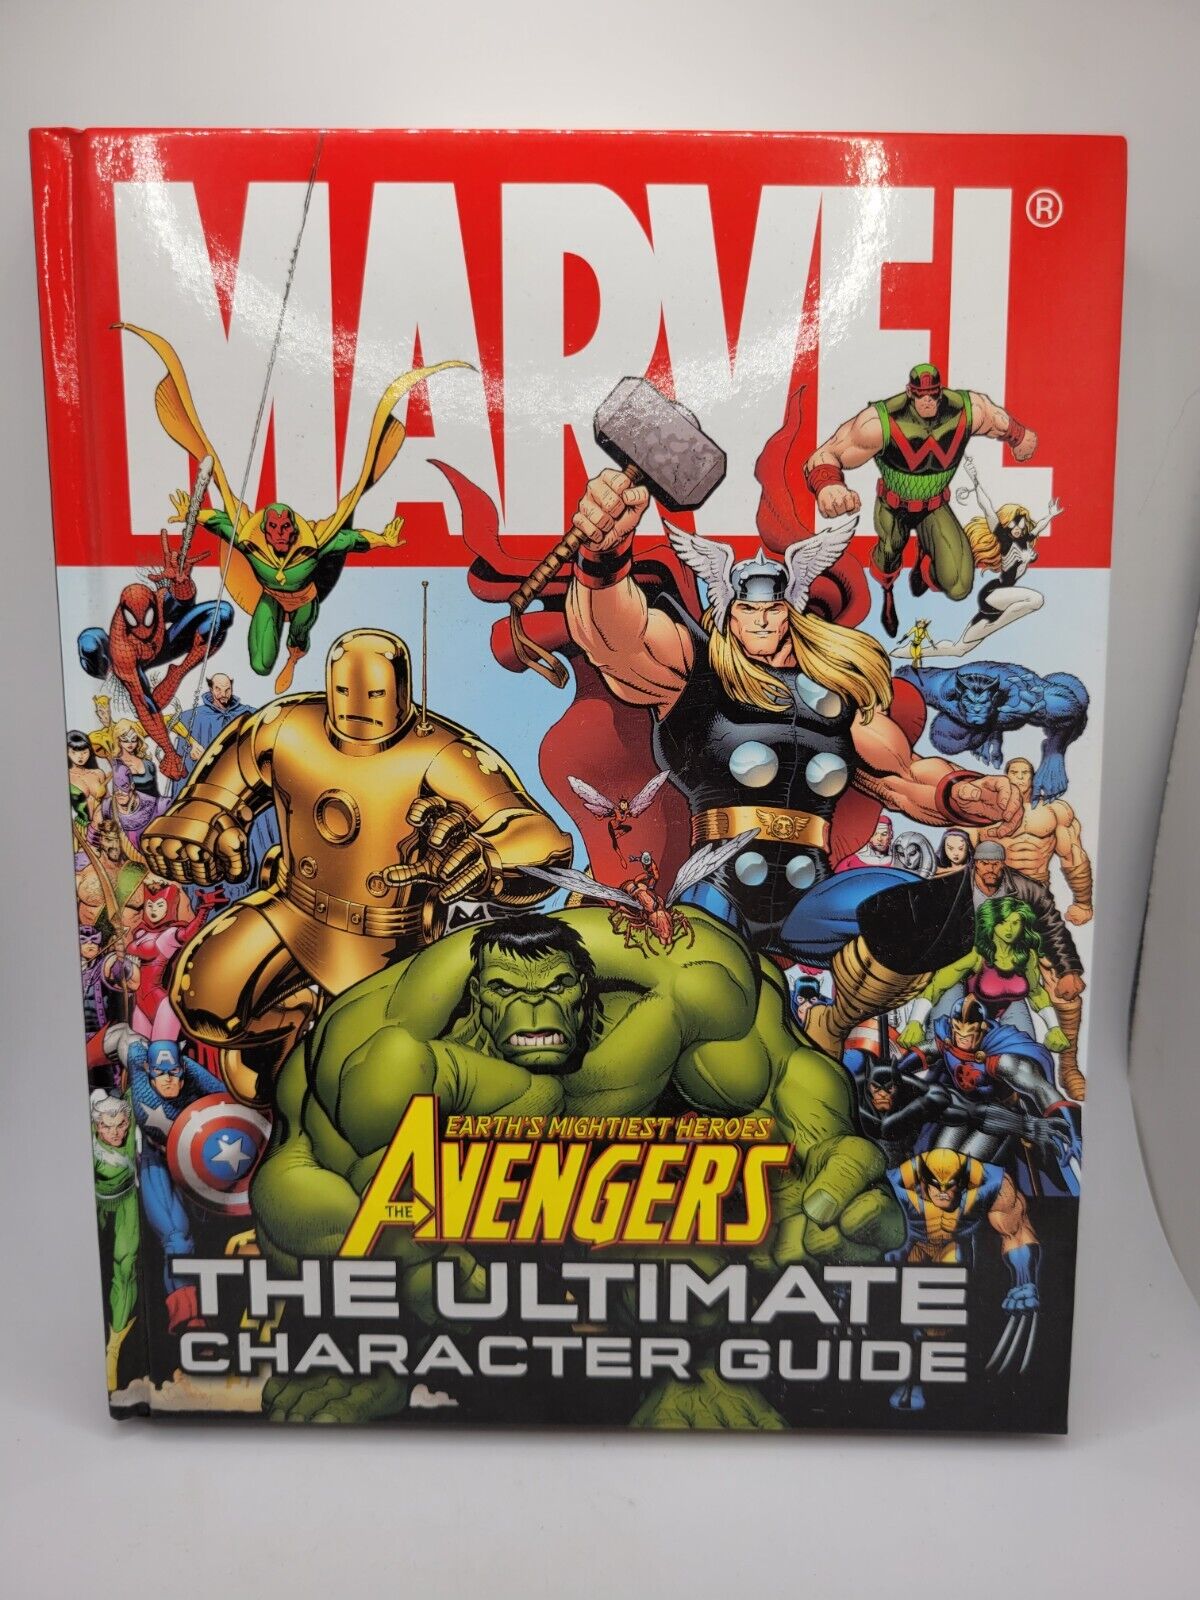 MARVEL AVENGERS: THE ULTIMATE CHARACTER GUIDE 2010 DK hardcover book